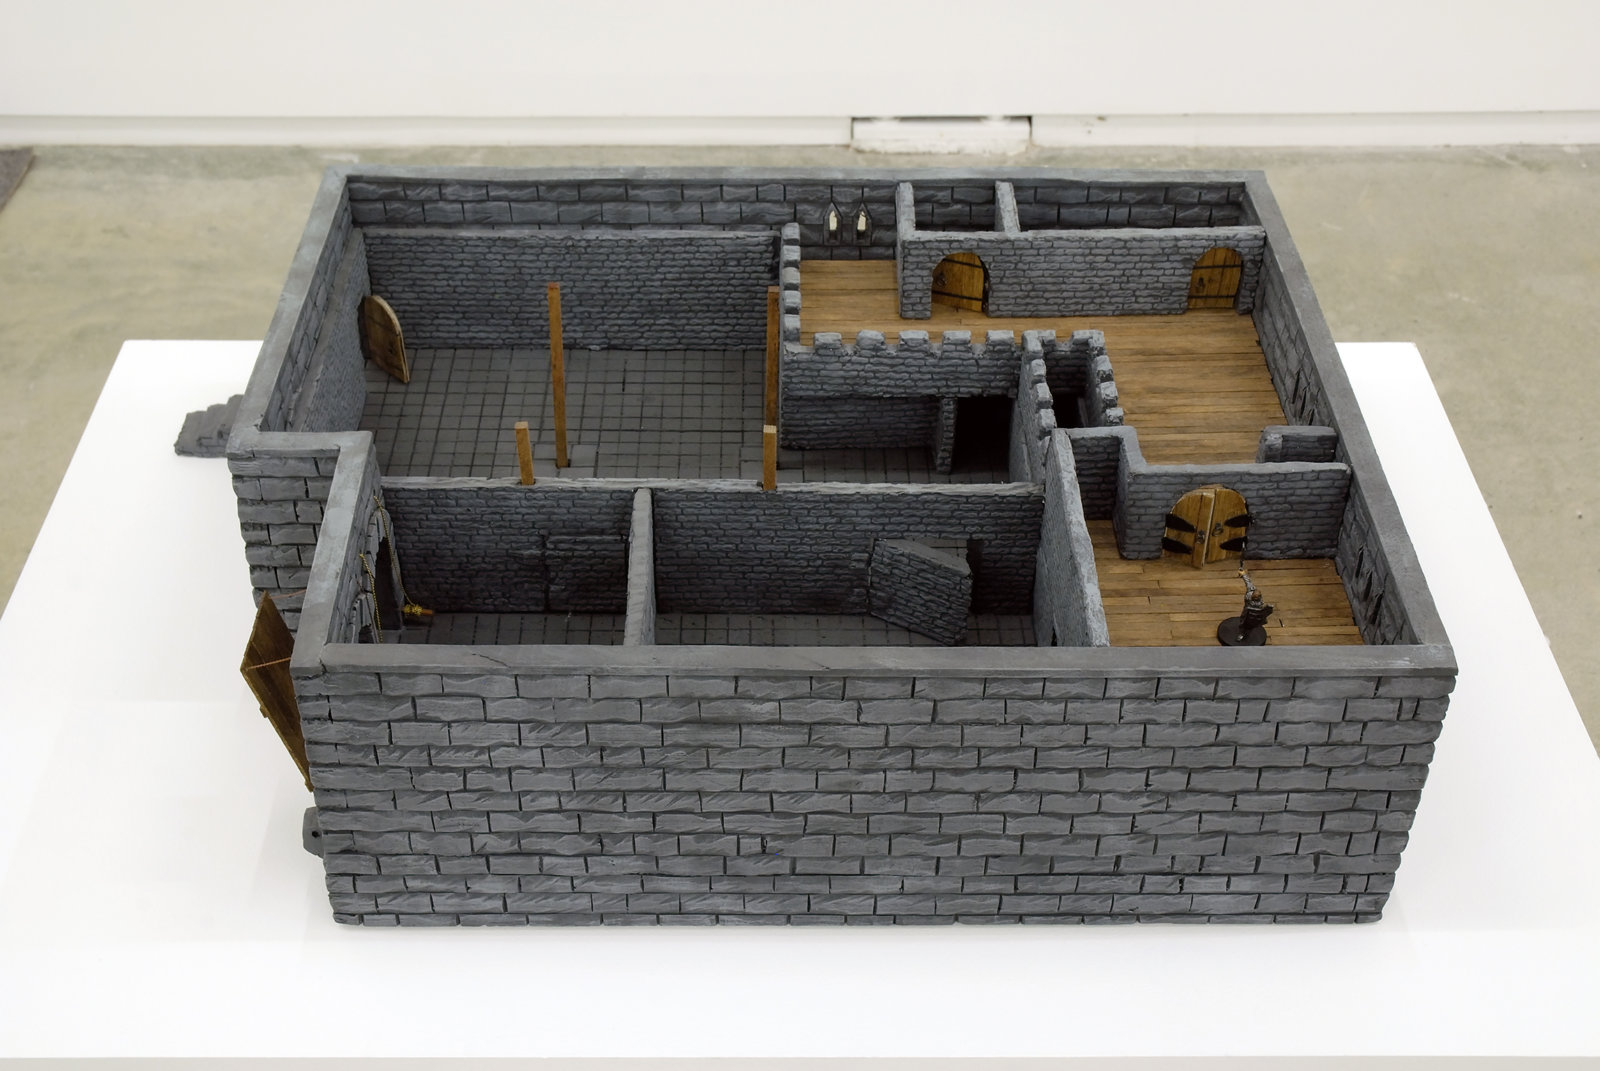 Kevin Schmidt, Dungeon Crawl, 2006, foam, balsa wood, plaster and paint, 12 x 17 x 24 in. (31 x 43 x 61 cm)